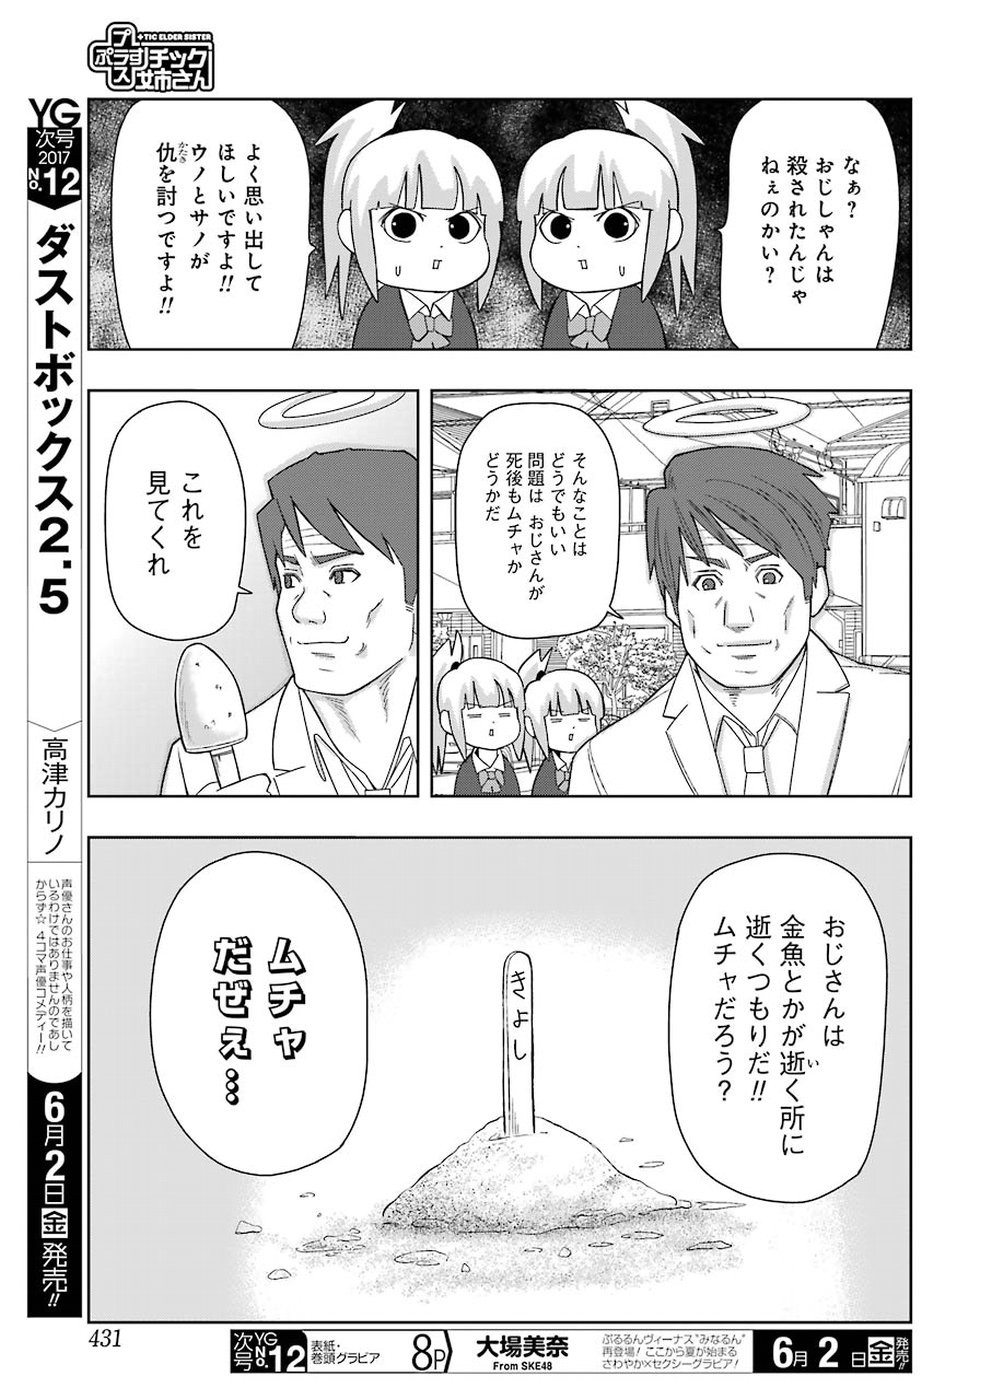 + Tic Nee-san - Chapter 147 - Page 5